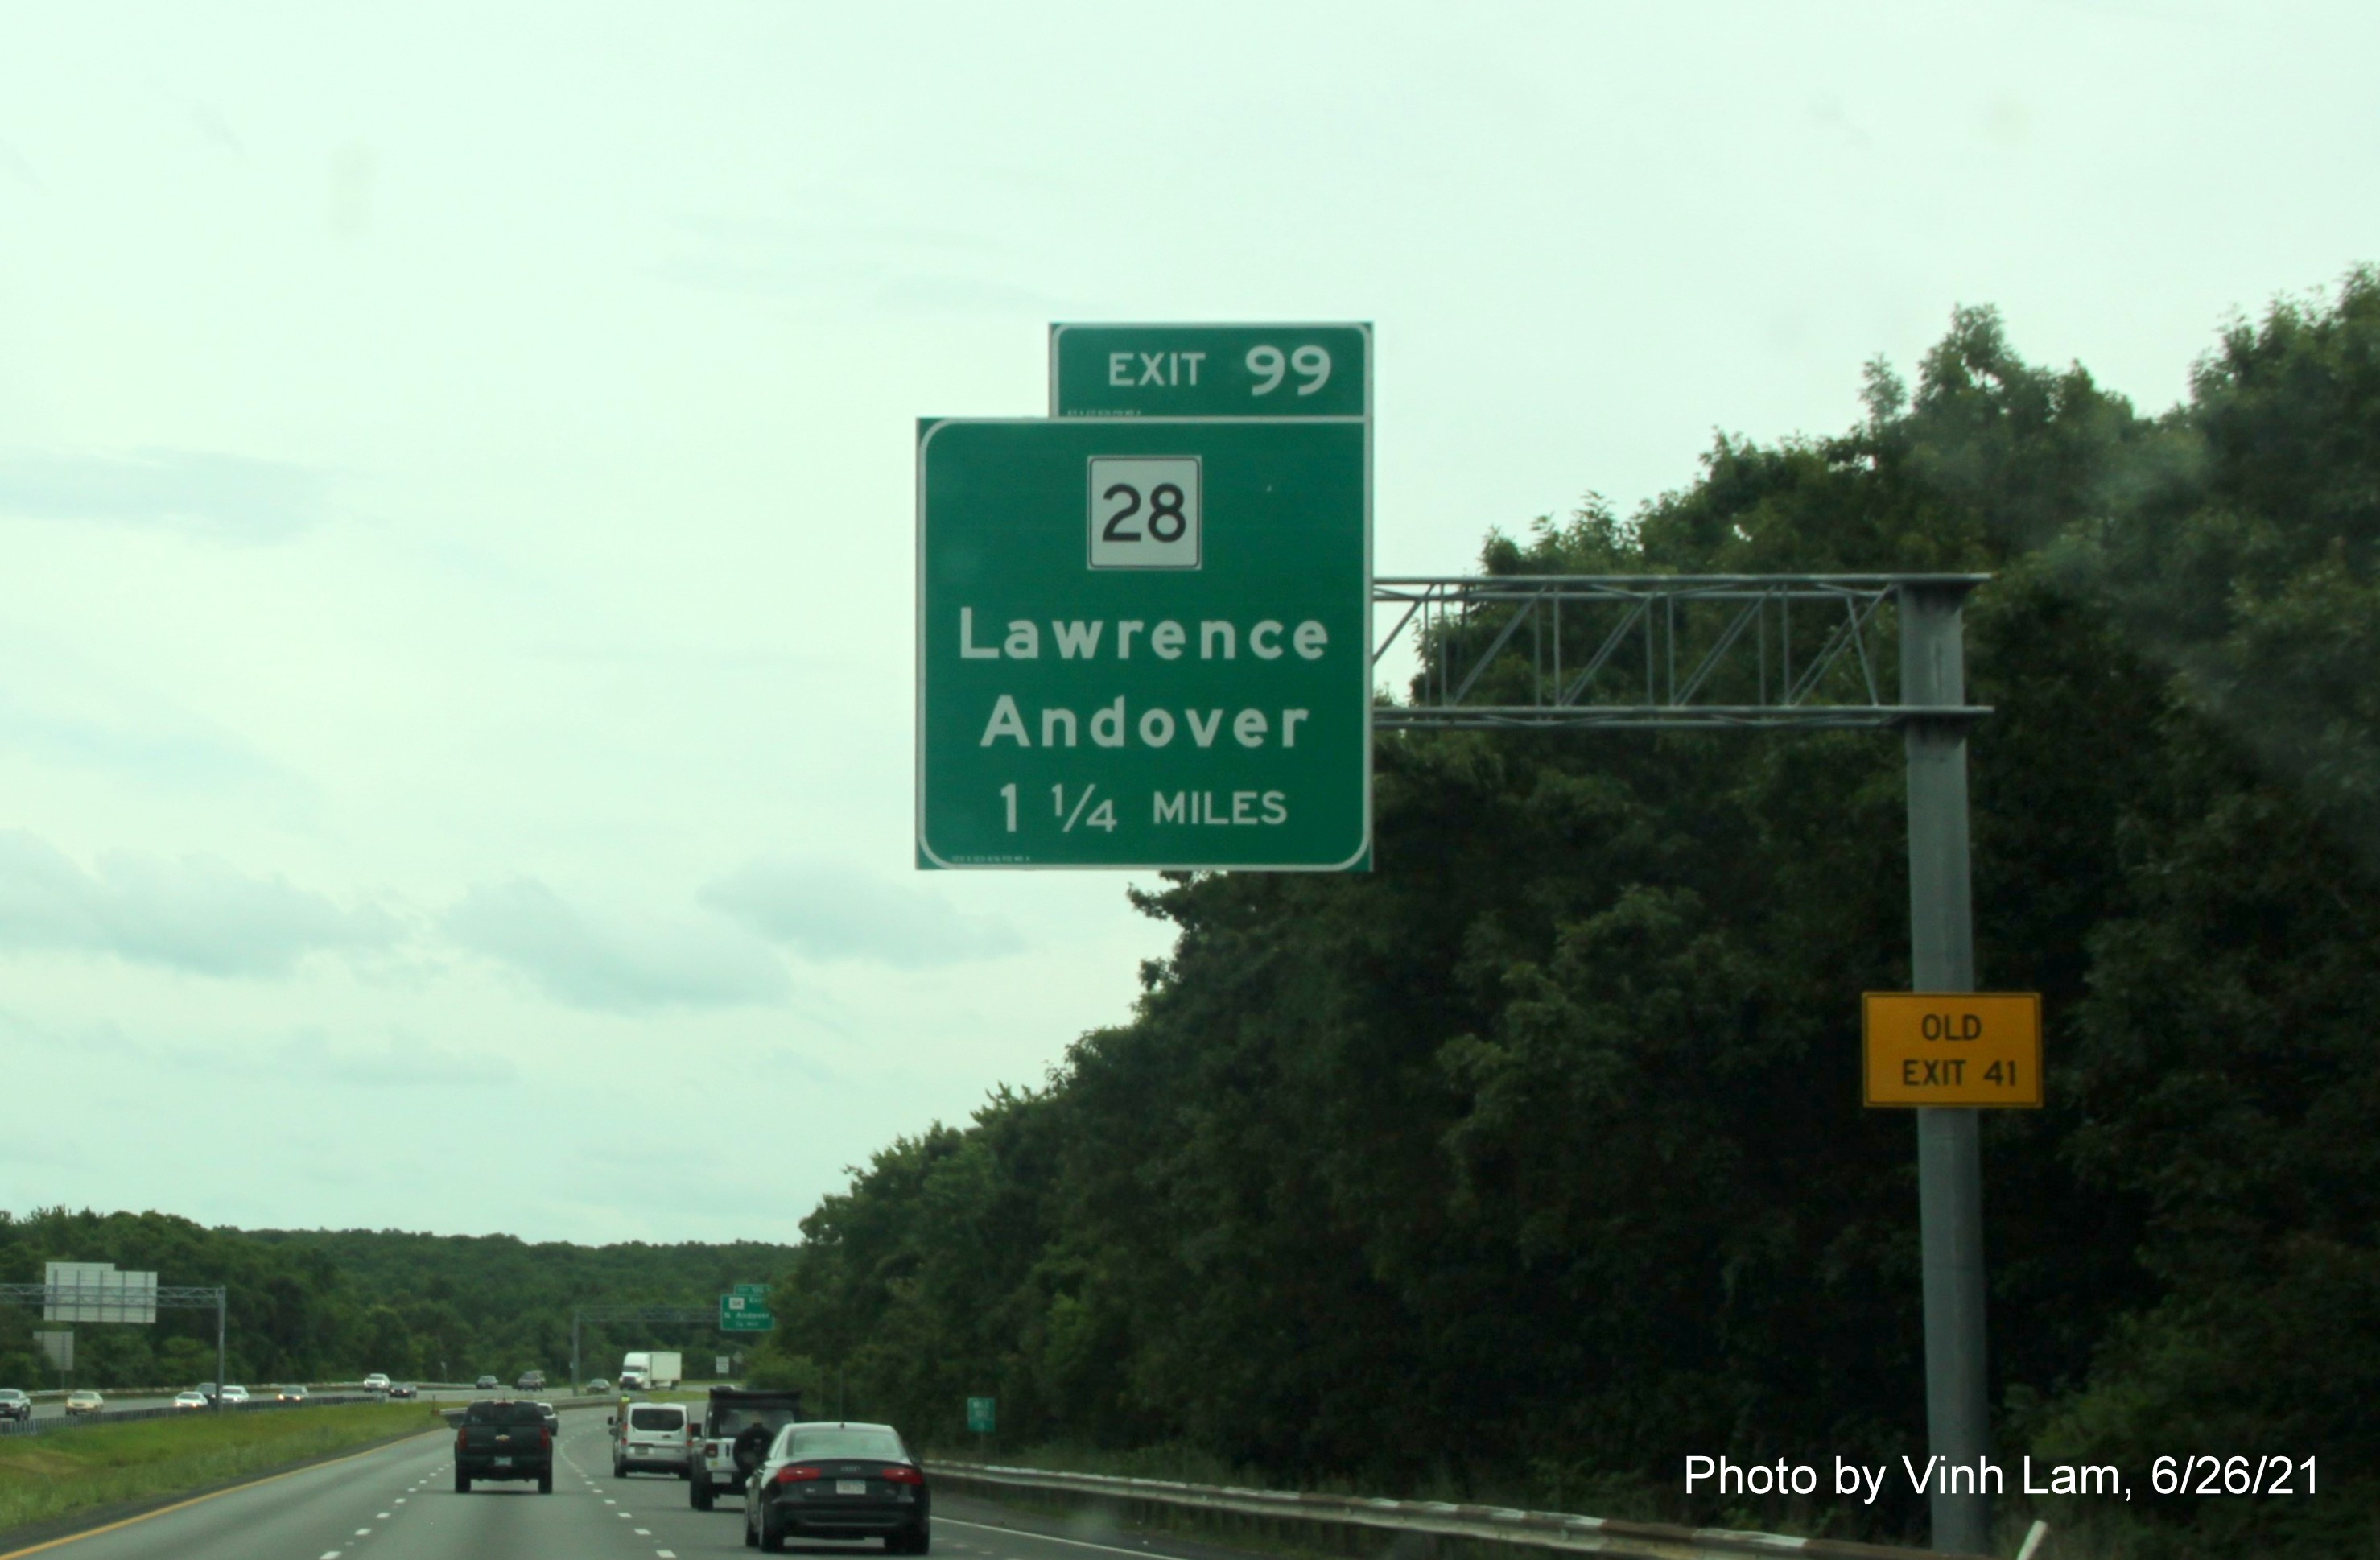 Image of 1 mile advance overhead sign for MA 28 exit with new milepost based exit number and yellow Old Exit 41 advisory sign on support on I-495 South in North Andover, by Vinh Lam, June 2021